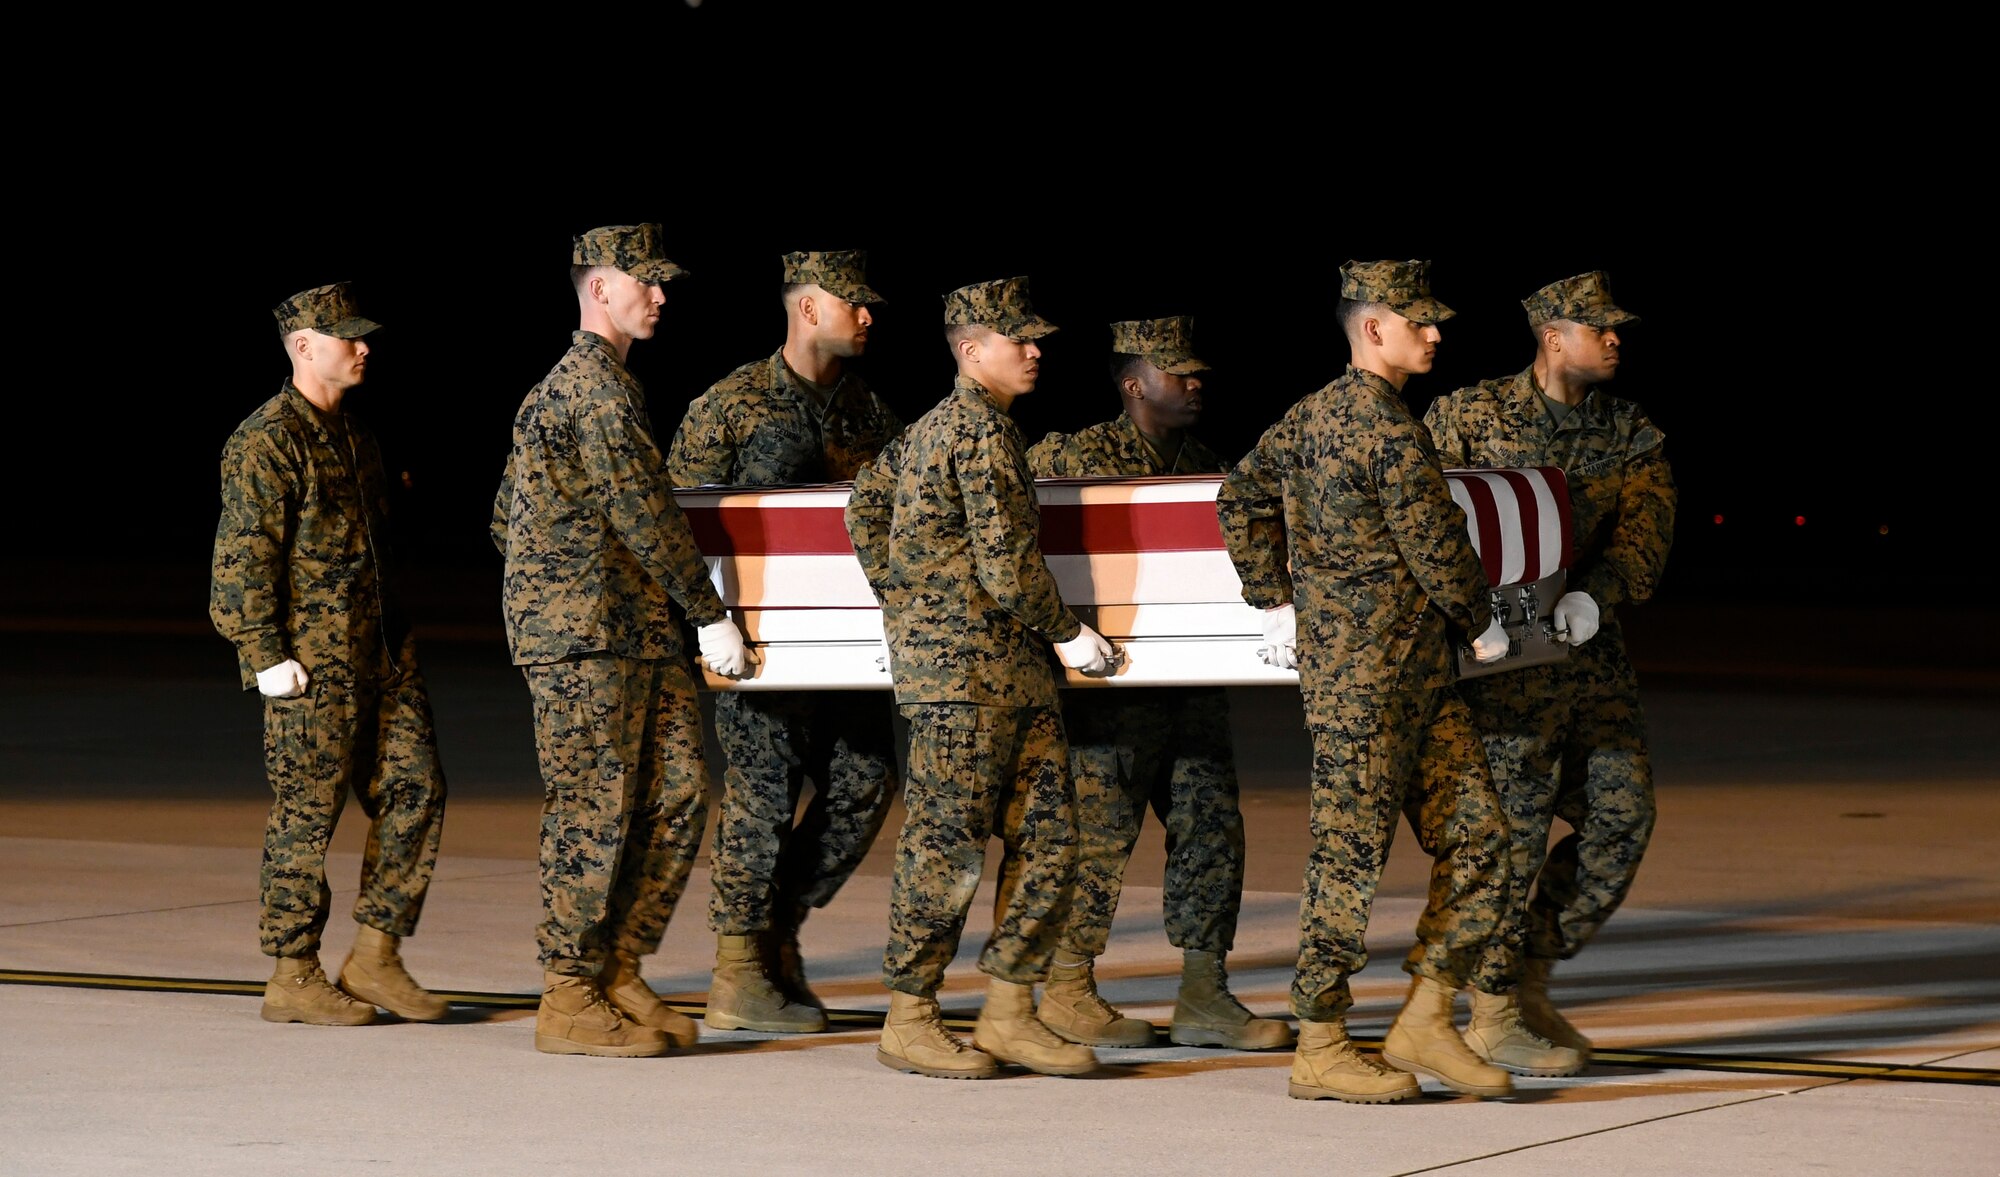 Dignified transfer of Gunnery Sgt. Diego D. Pongo, of Simi Valley, Calif., March 11, 2020